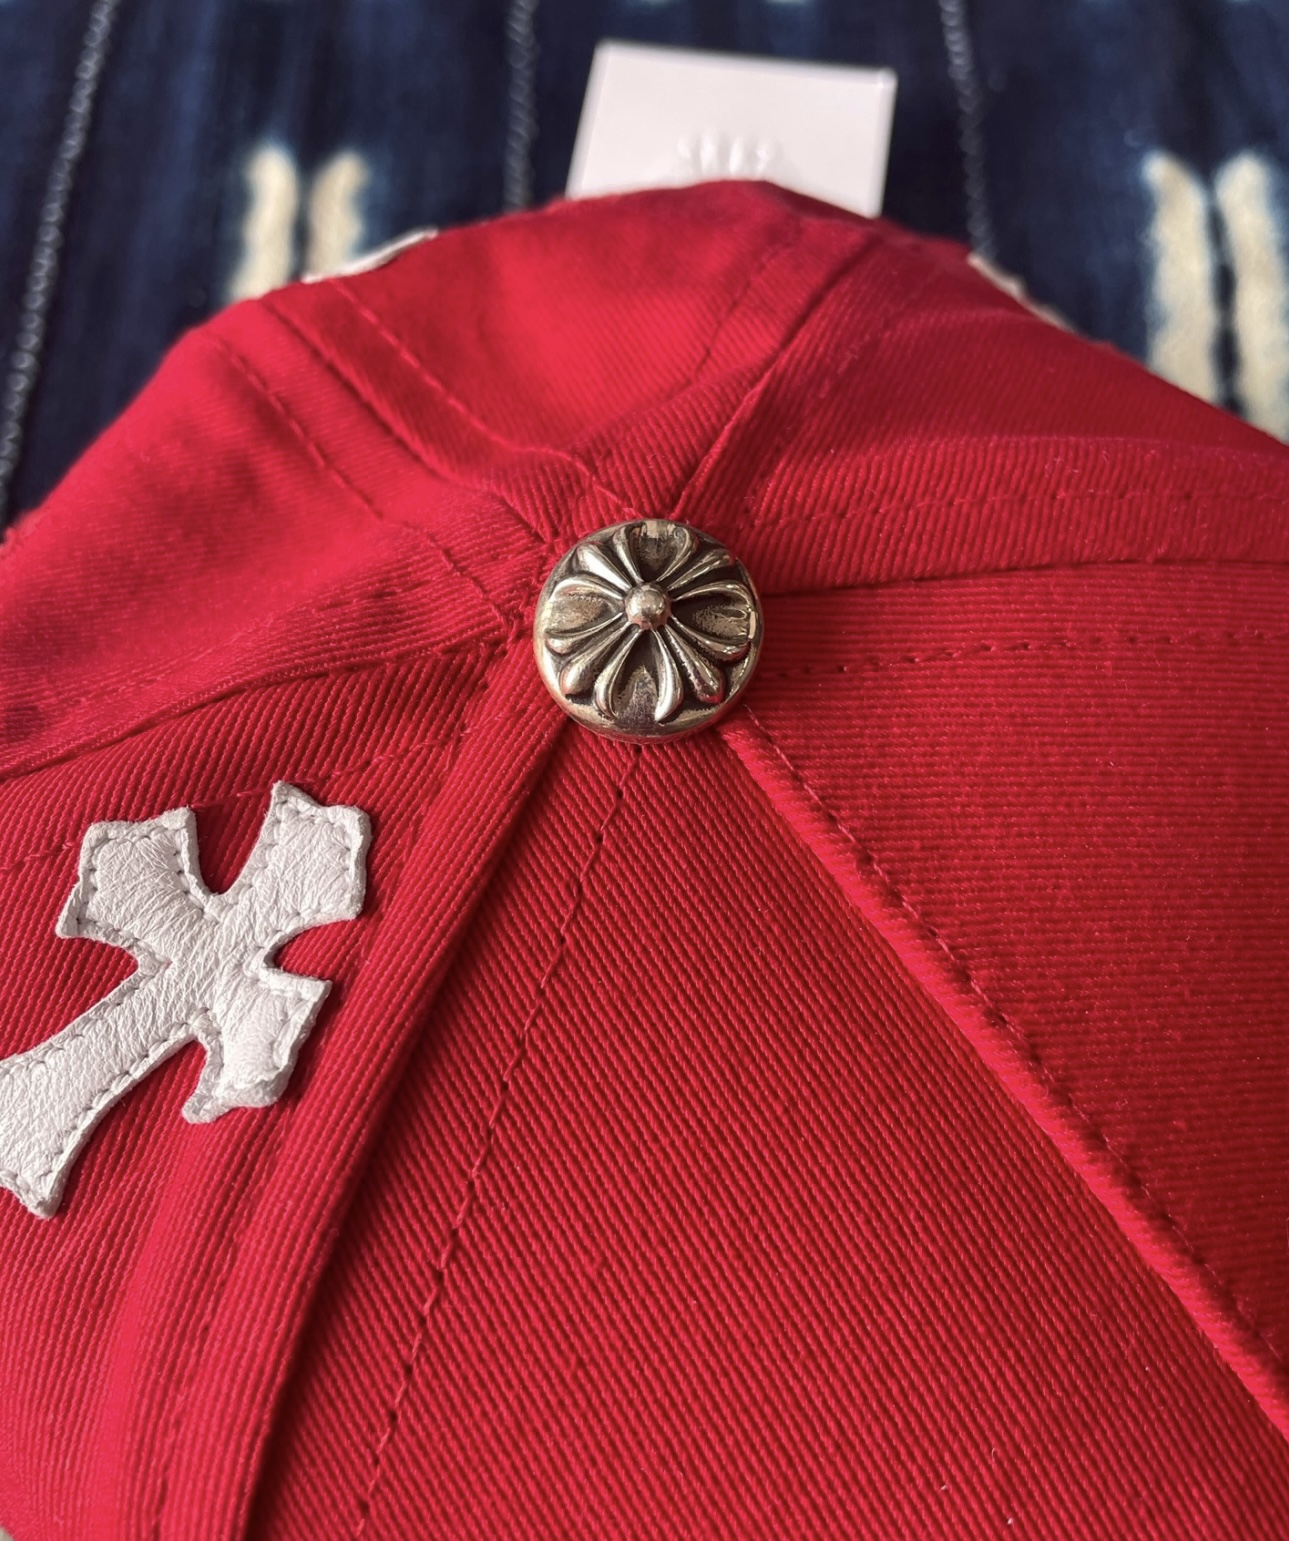 Chrome Hearts Red Cap with White Cross Patch - 7